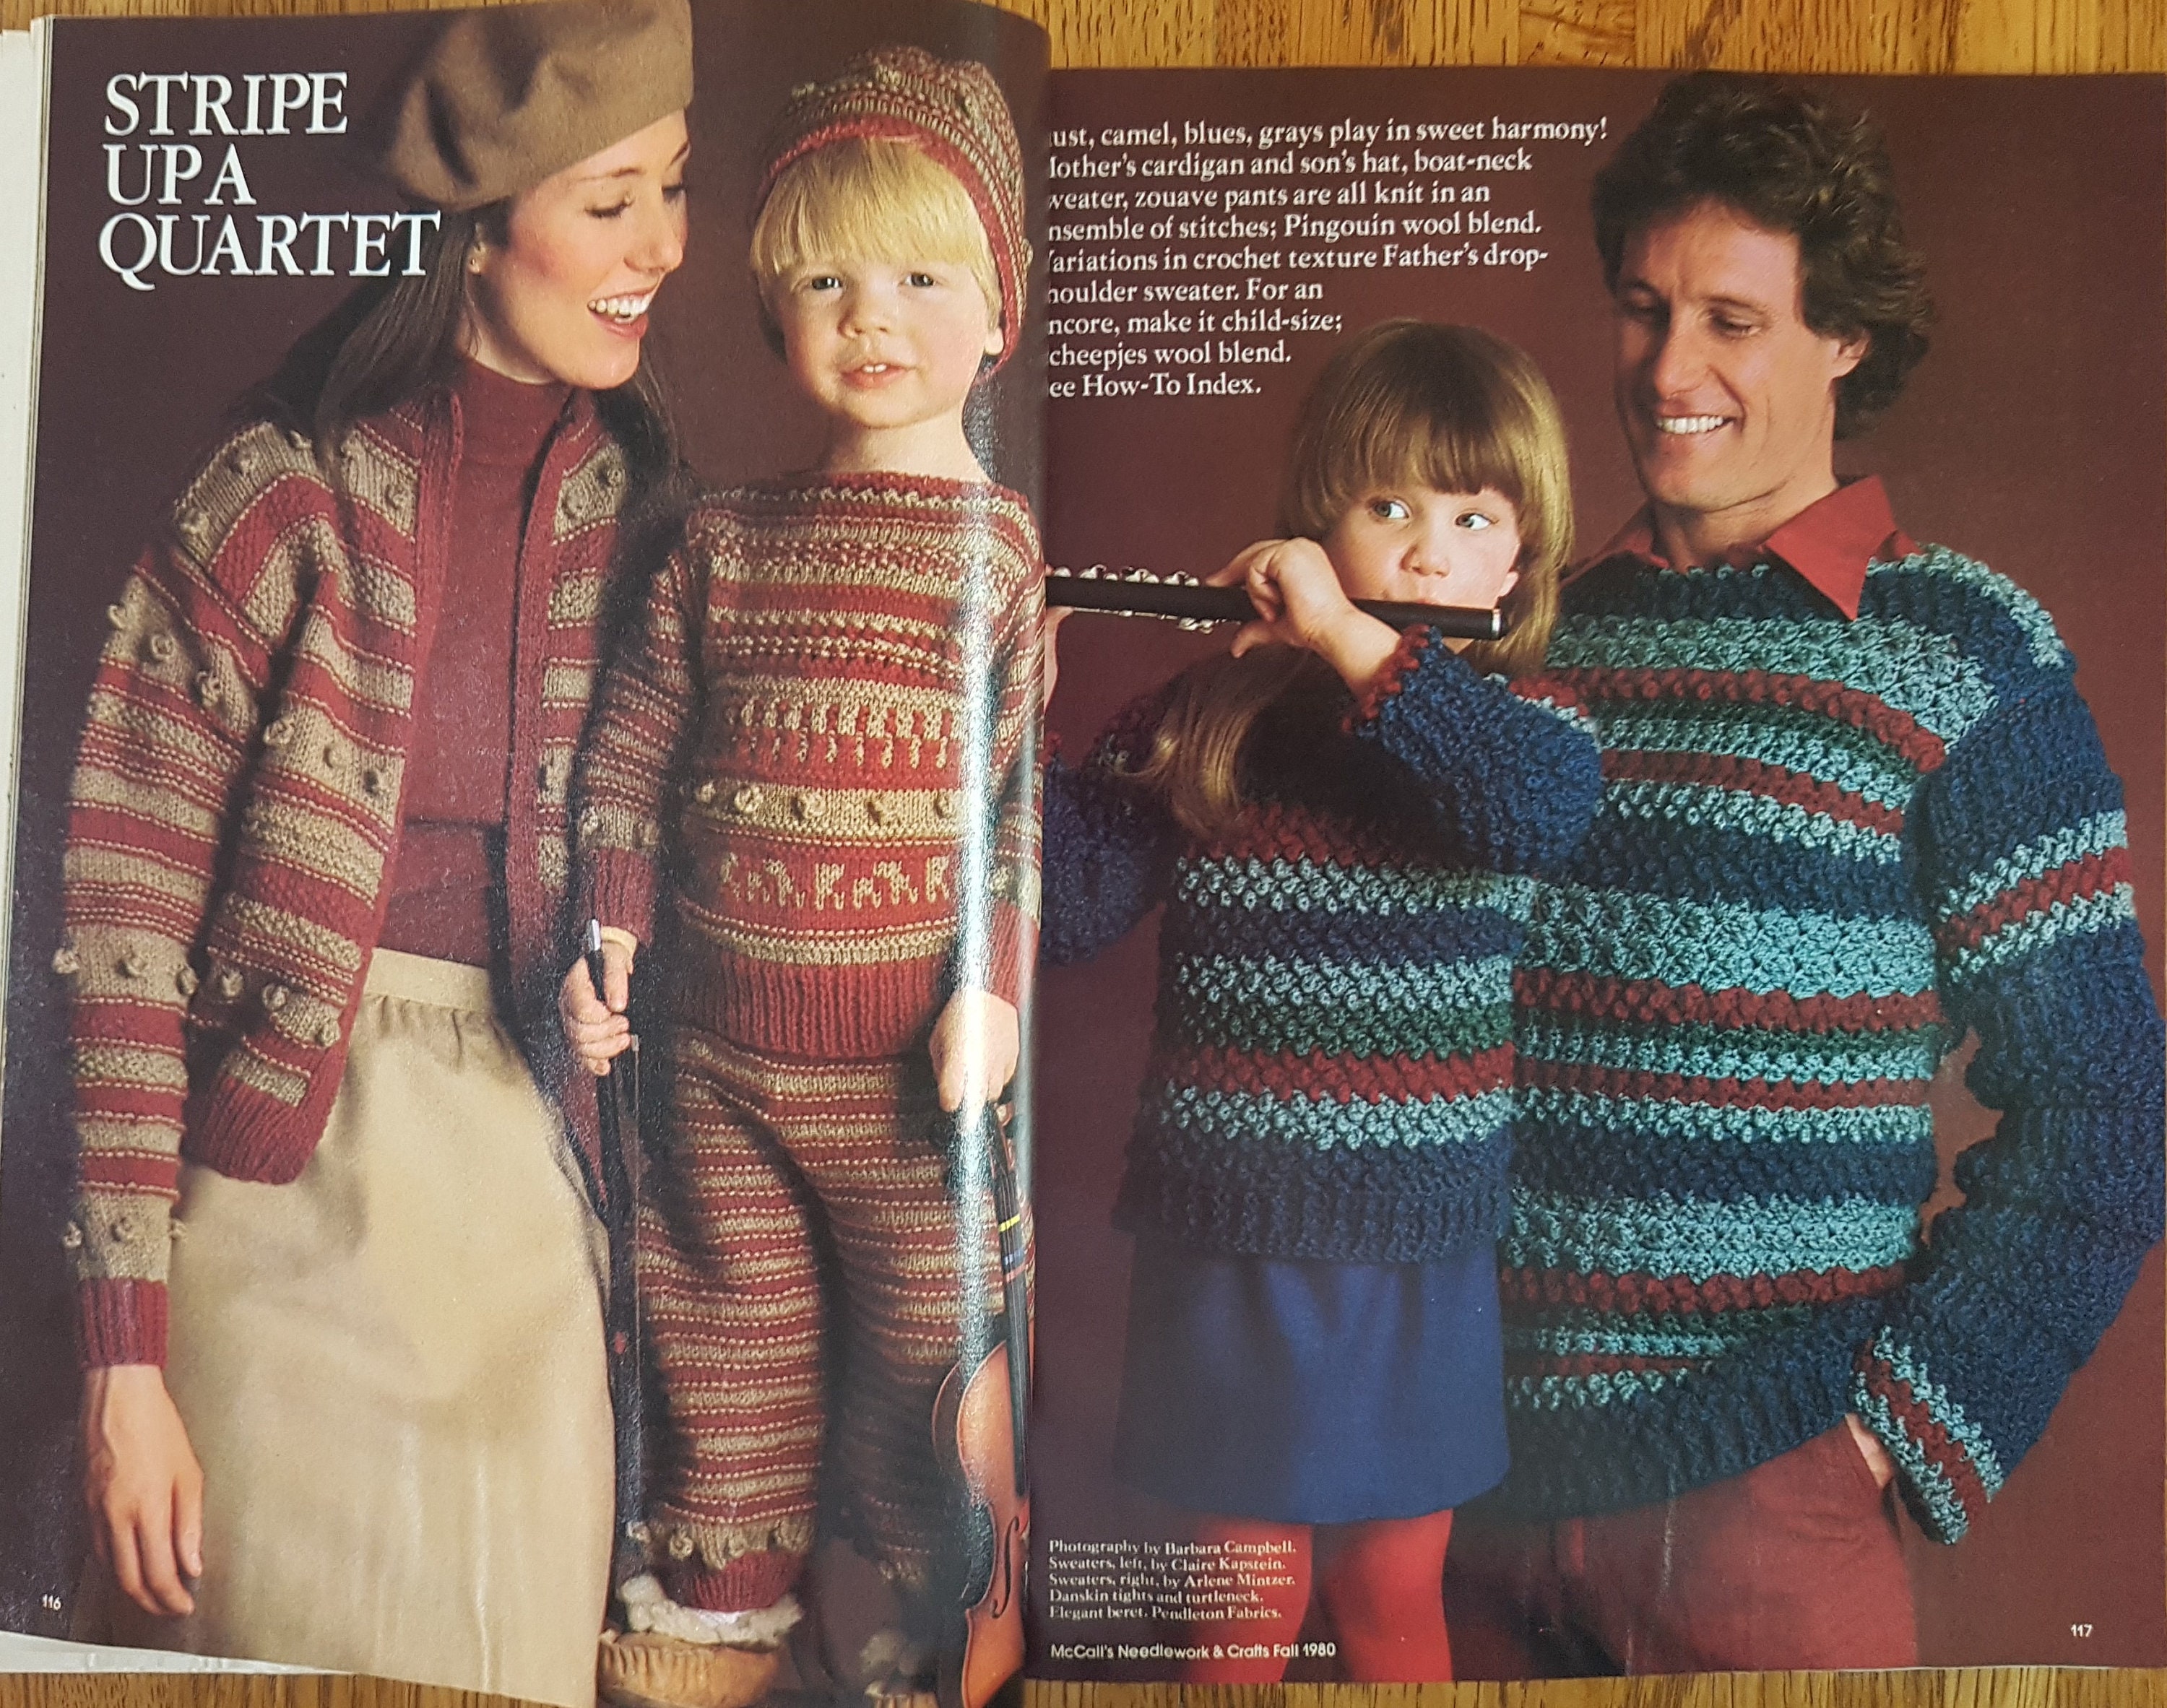 McCall's Needlework and Crafts Magazine Fall 1980 Knit | Etsy